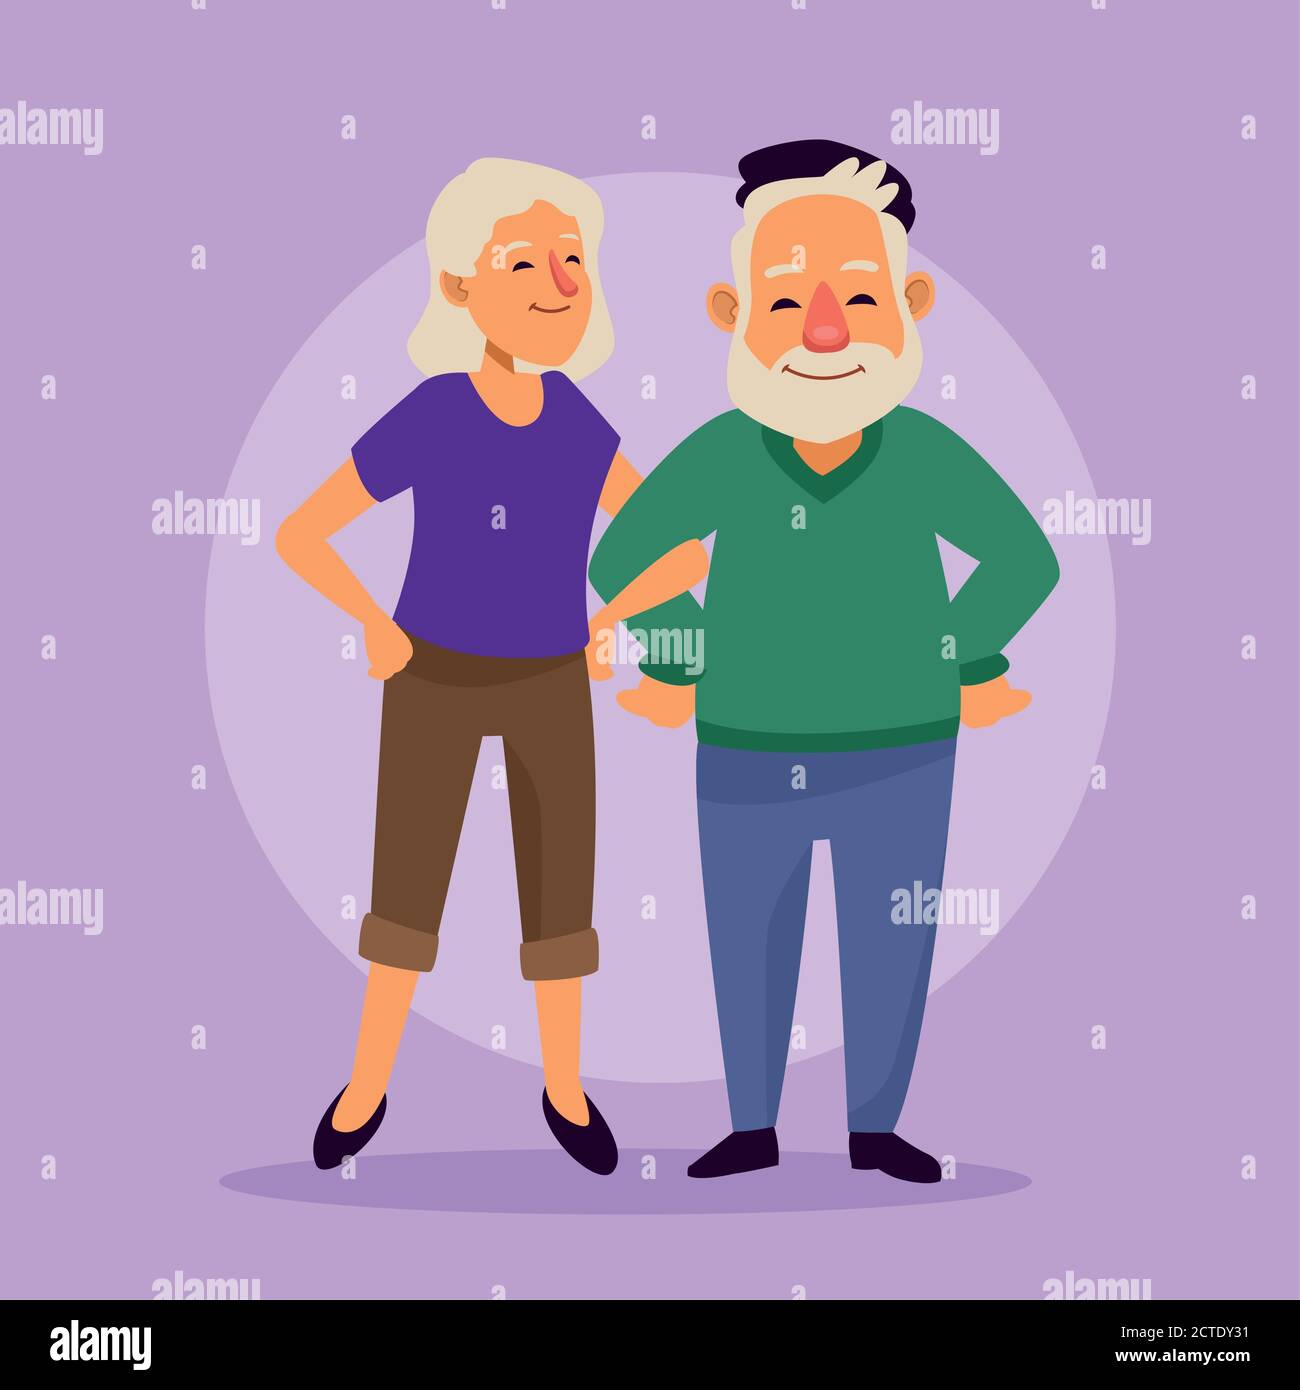 old couple active seniors characters vector illustration design Stock Vector